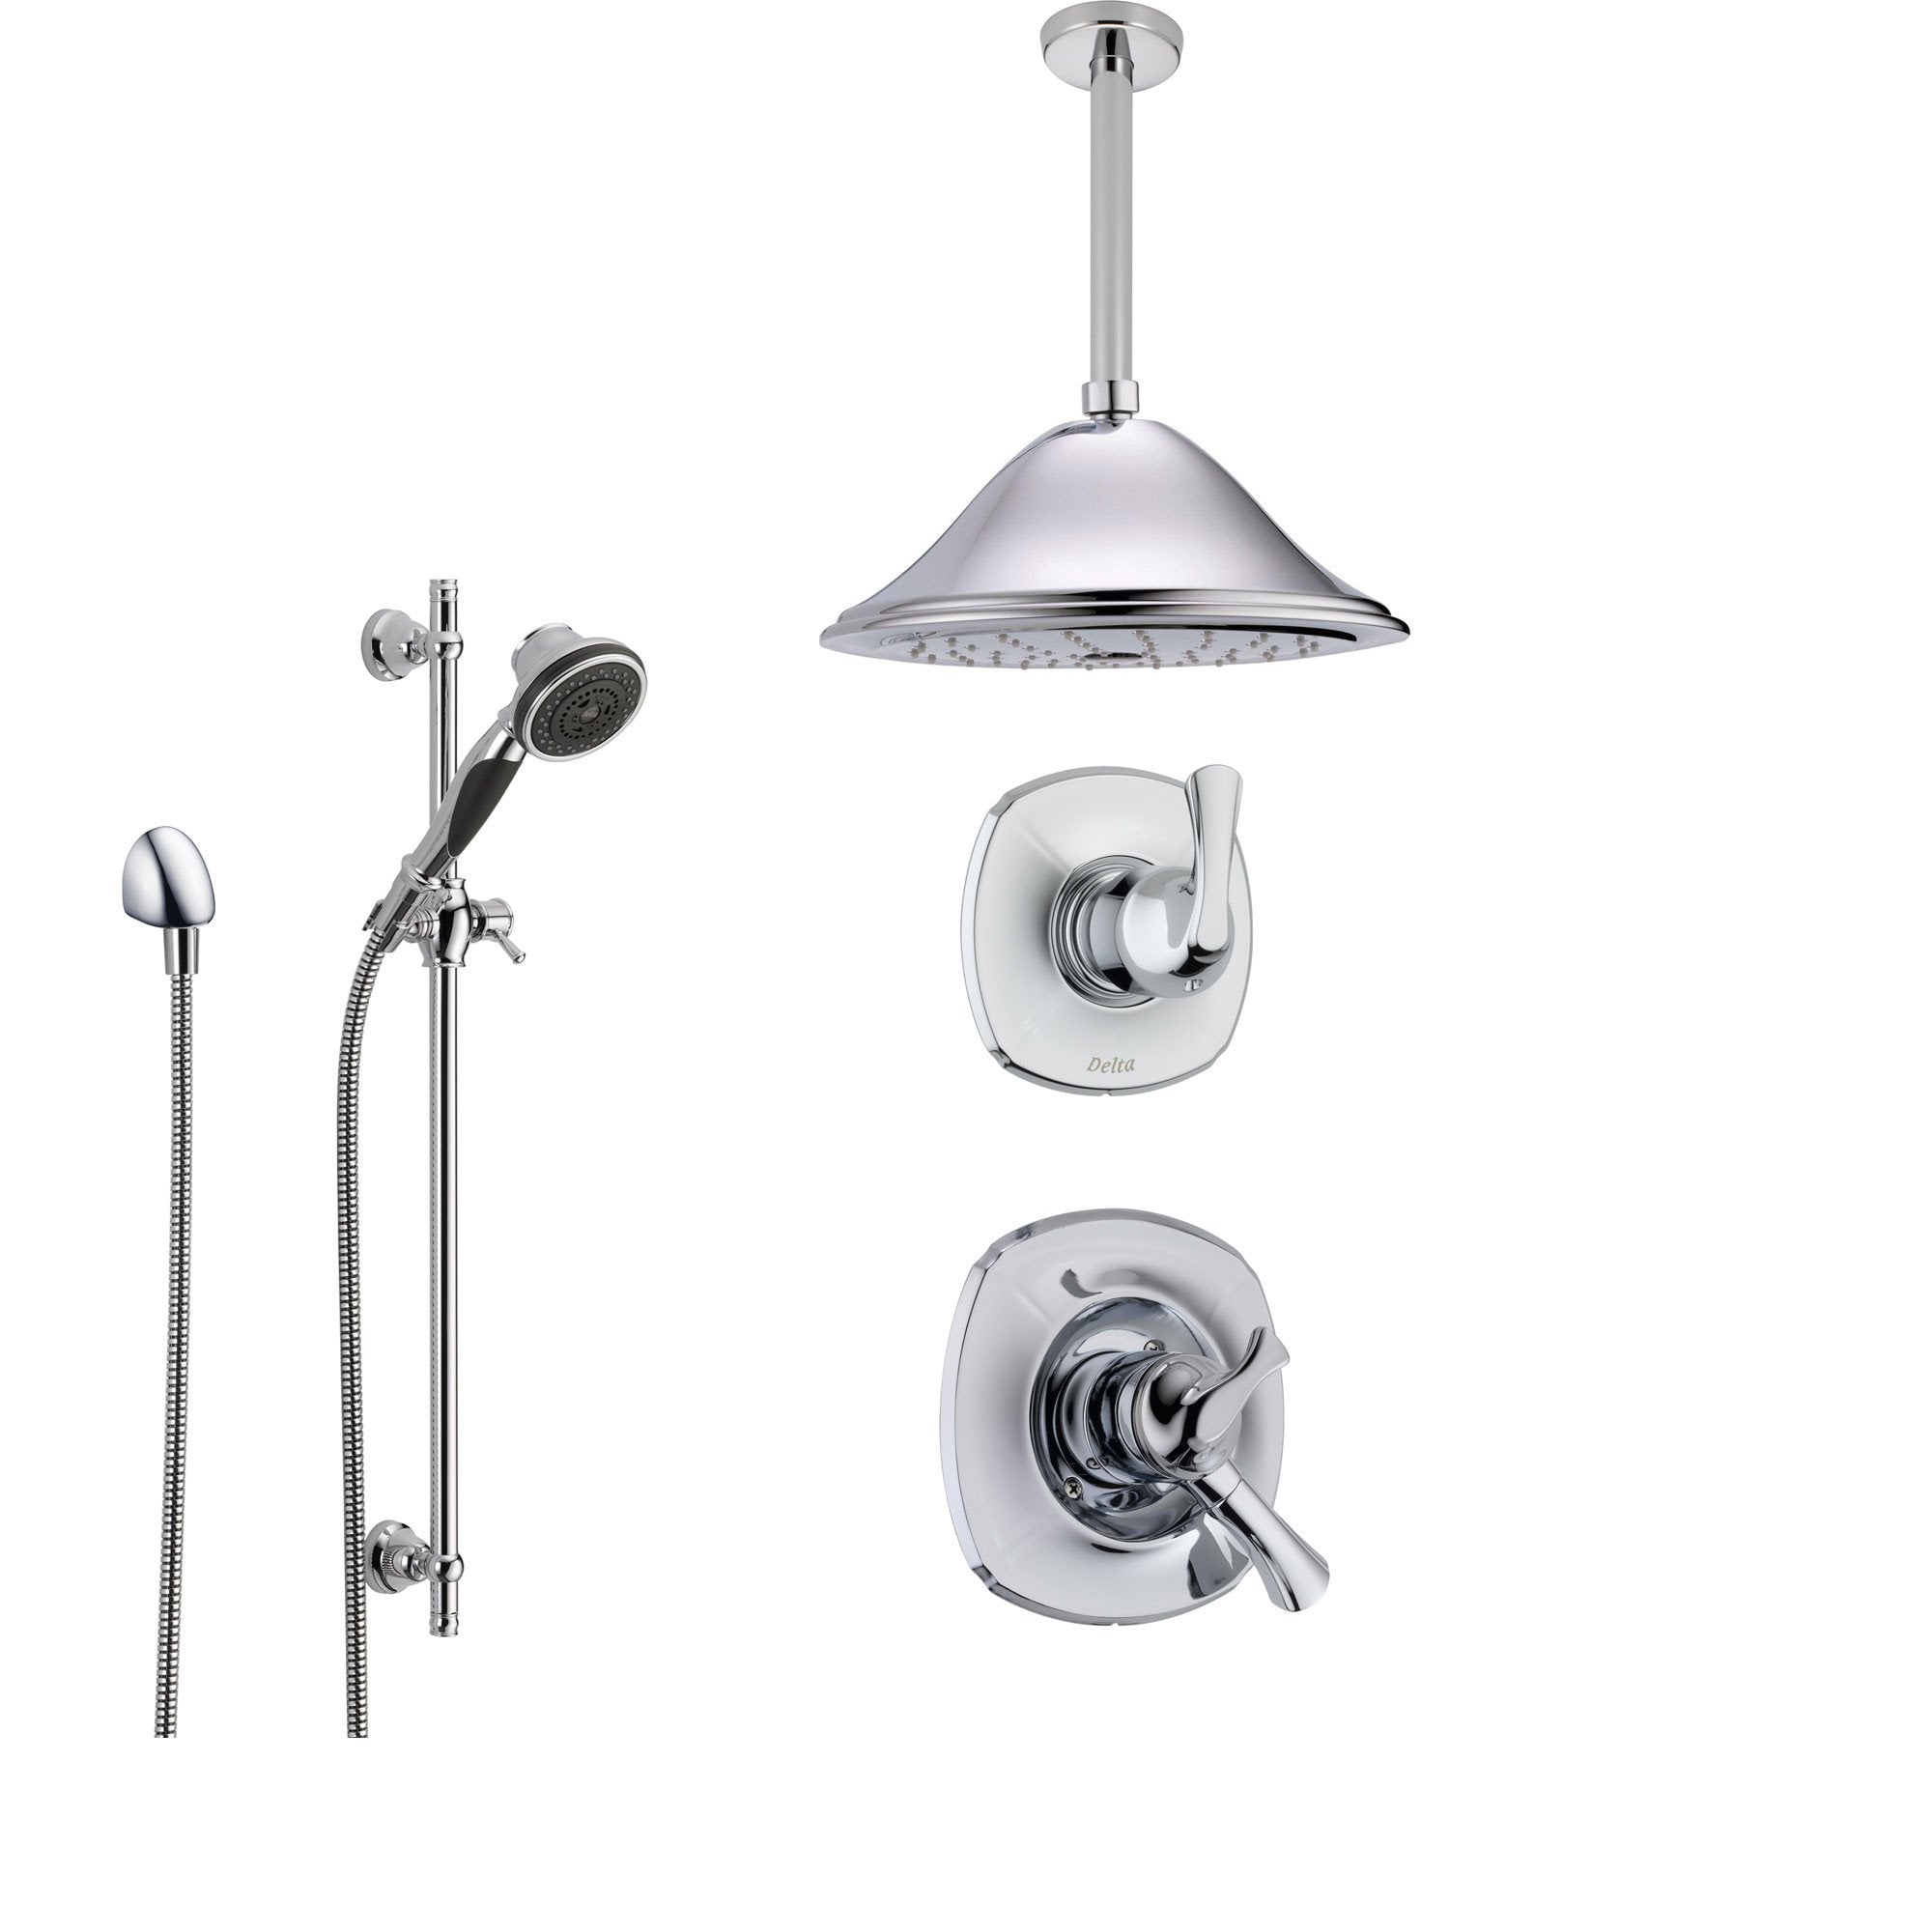 Delta Addison Chrome Shower System with Dual Control Shower Handle, 3-setting Diverter, Large Ceiling Mount Rain Shower Head, and Handheld Shower SS179282